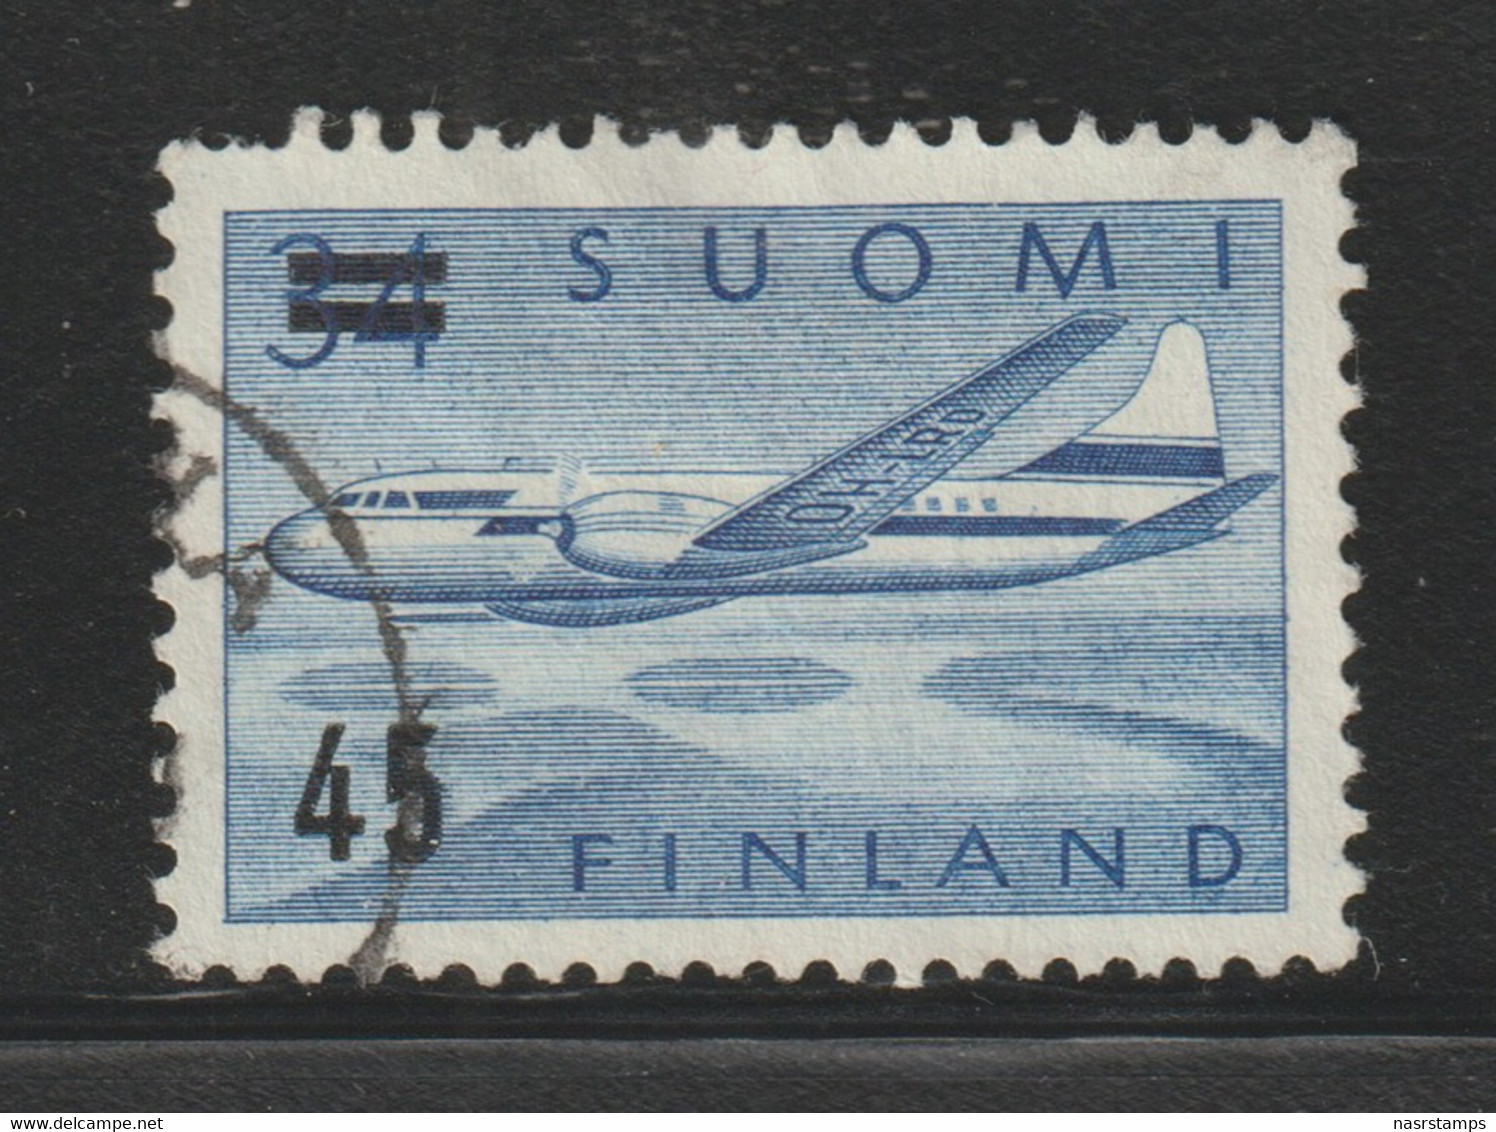 FINLAND - 1959 - ( Convair 440 Over Lakes - 45m On 34m ) - As Scan - Gebraucht